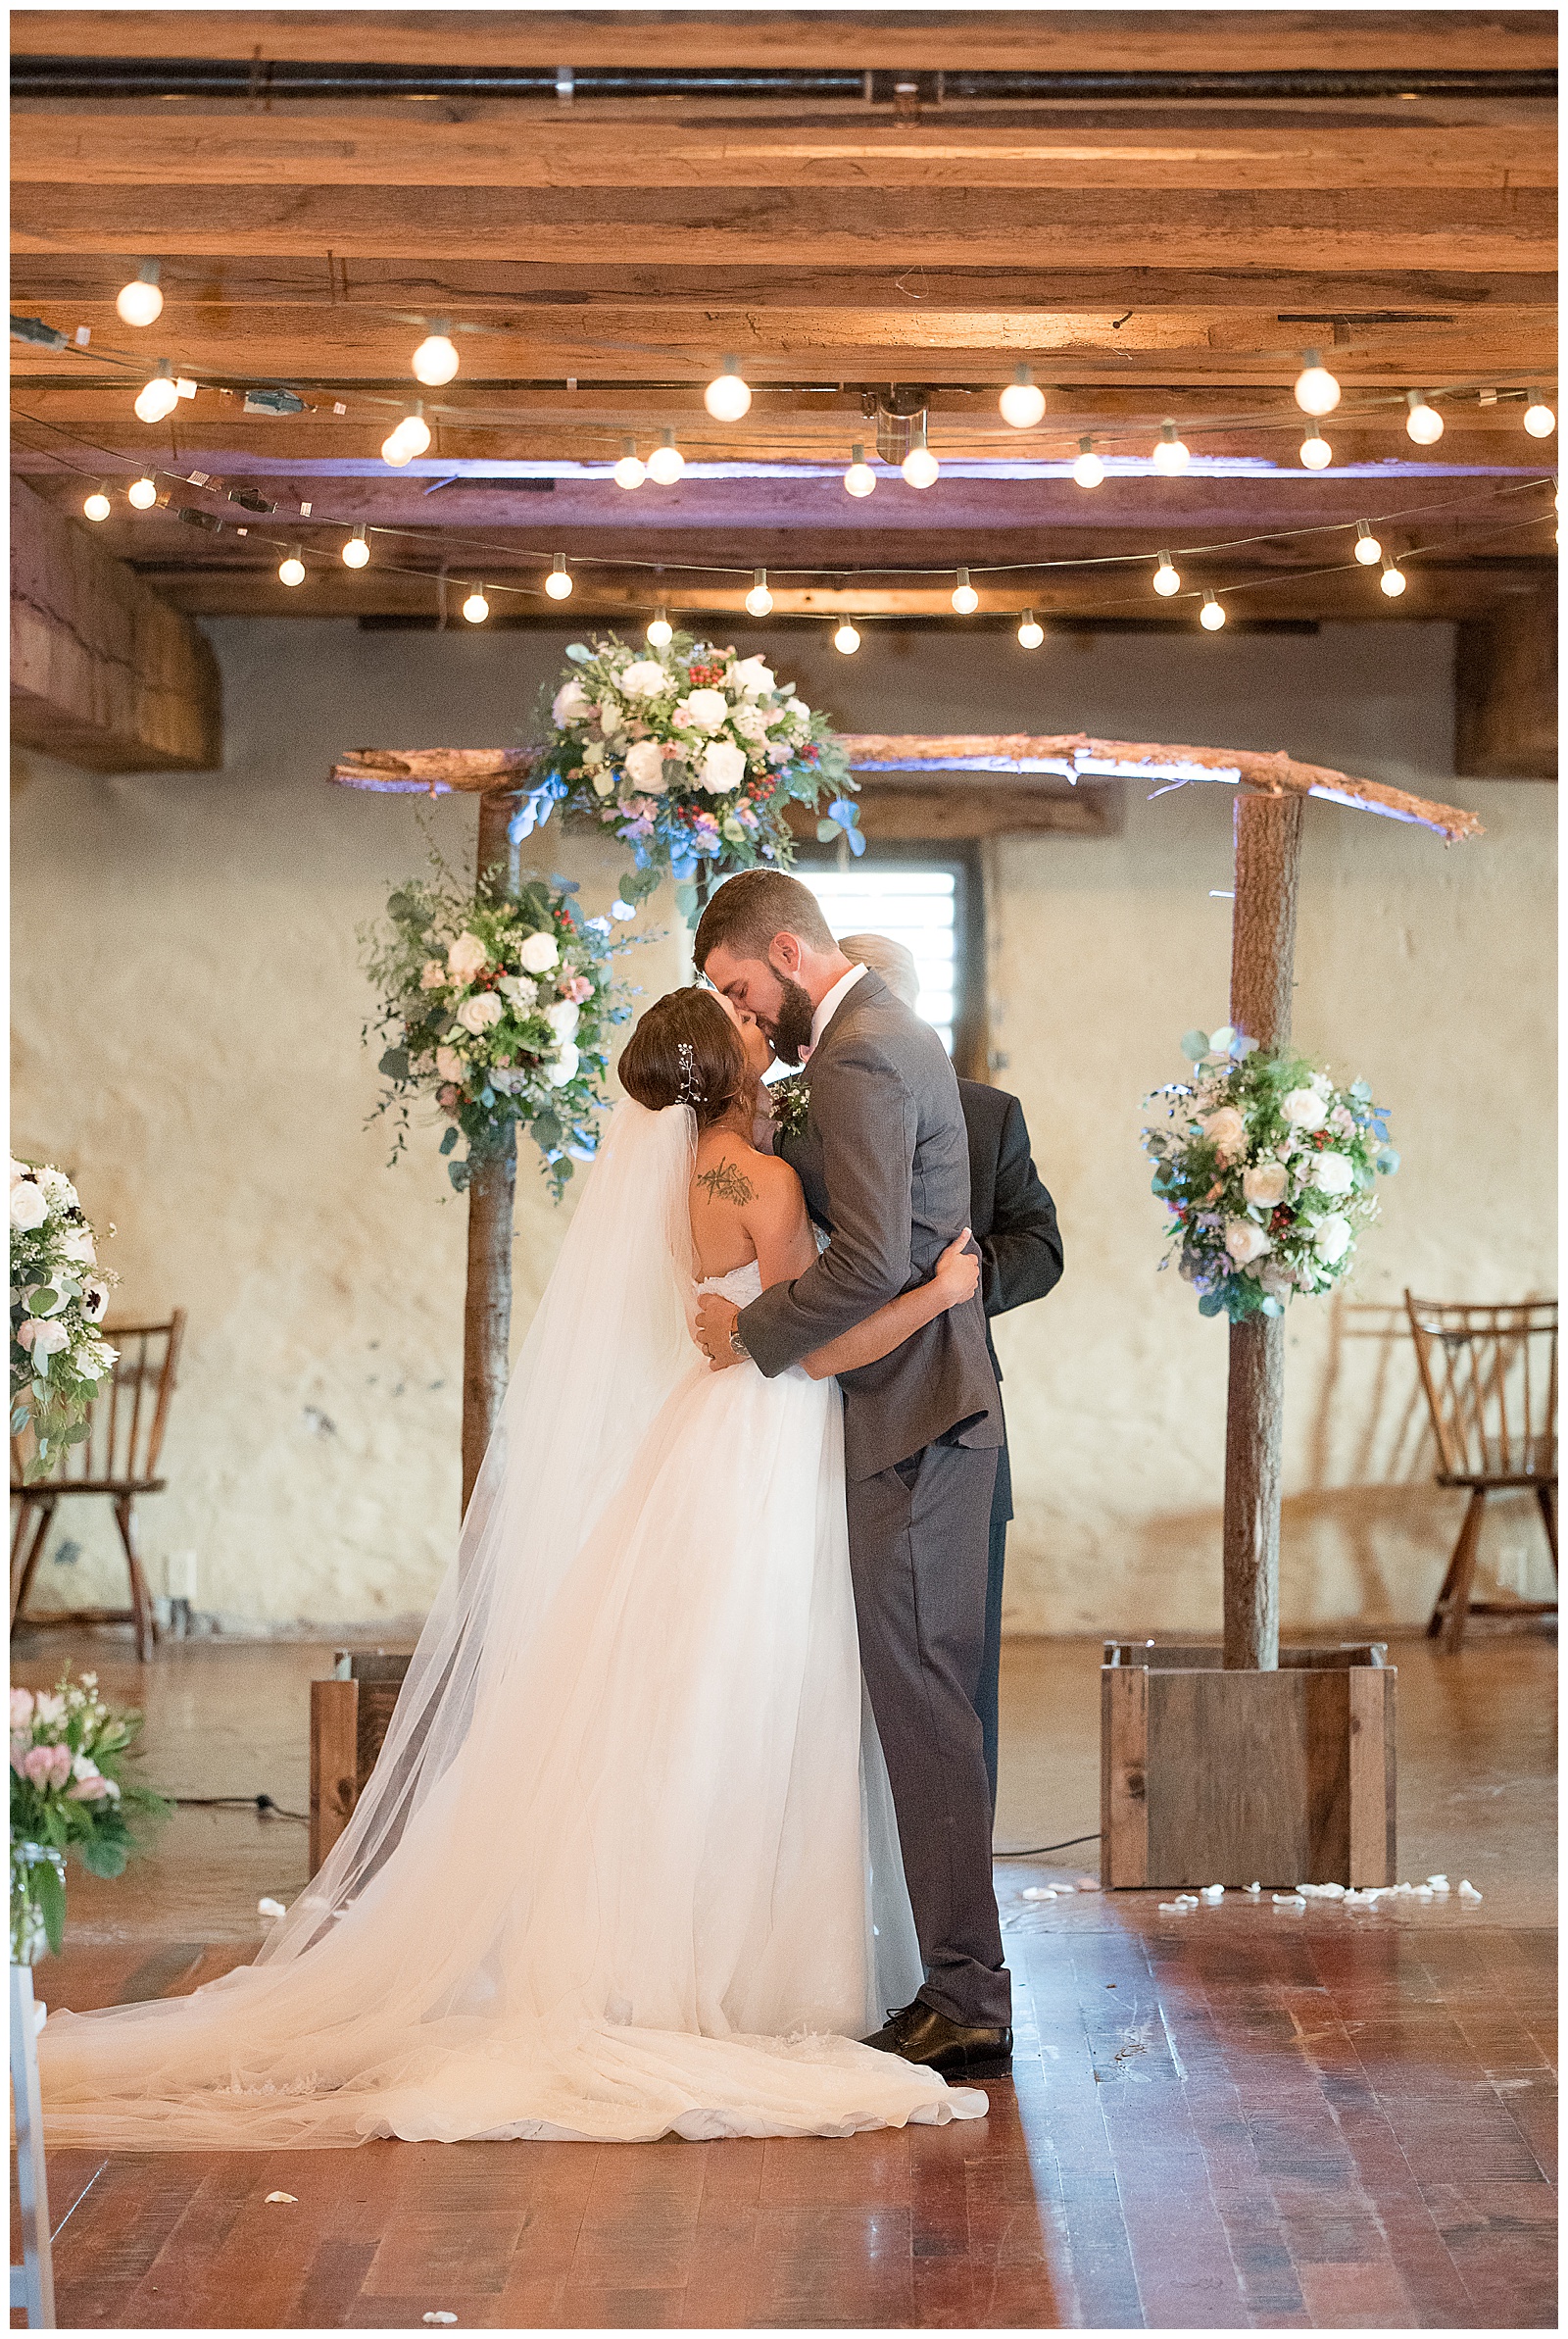 bride and groom share first kiss at ceremony inside barn at Country Barn